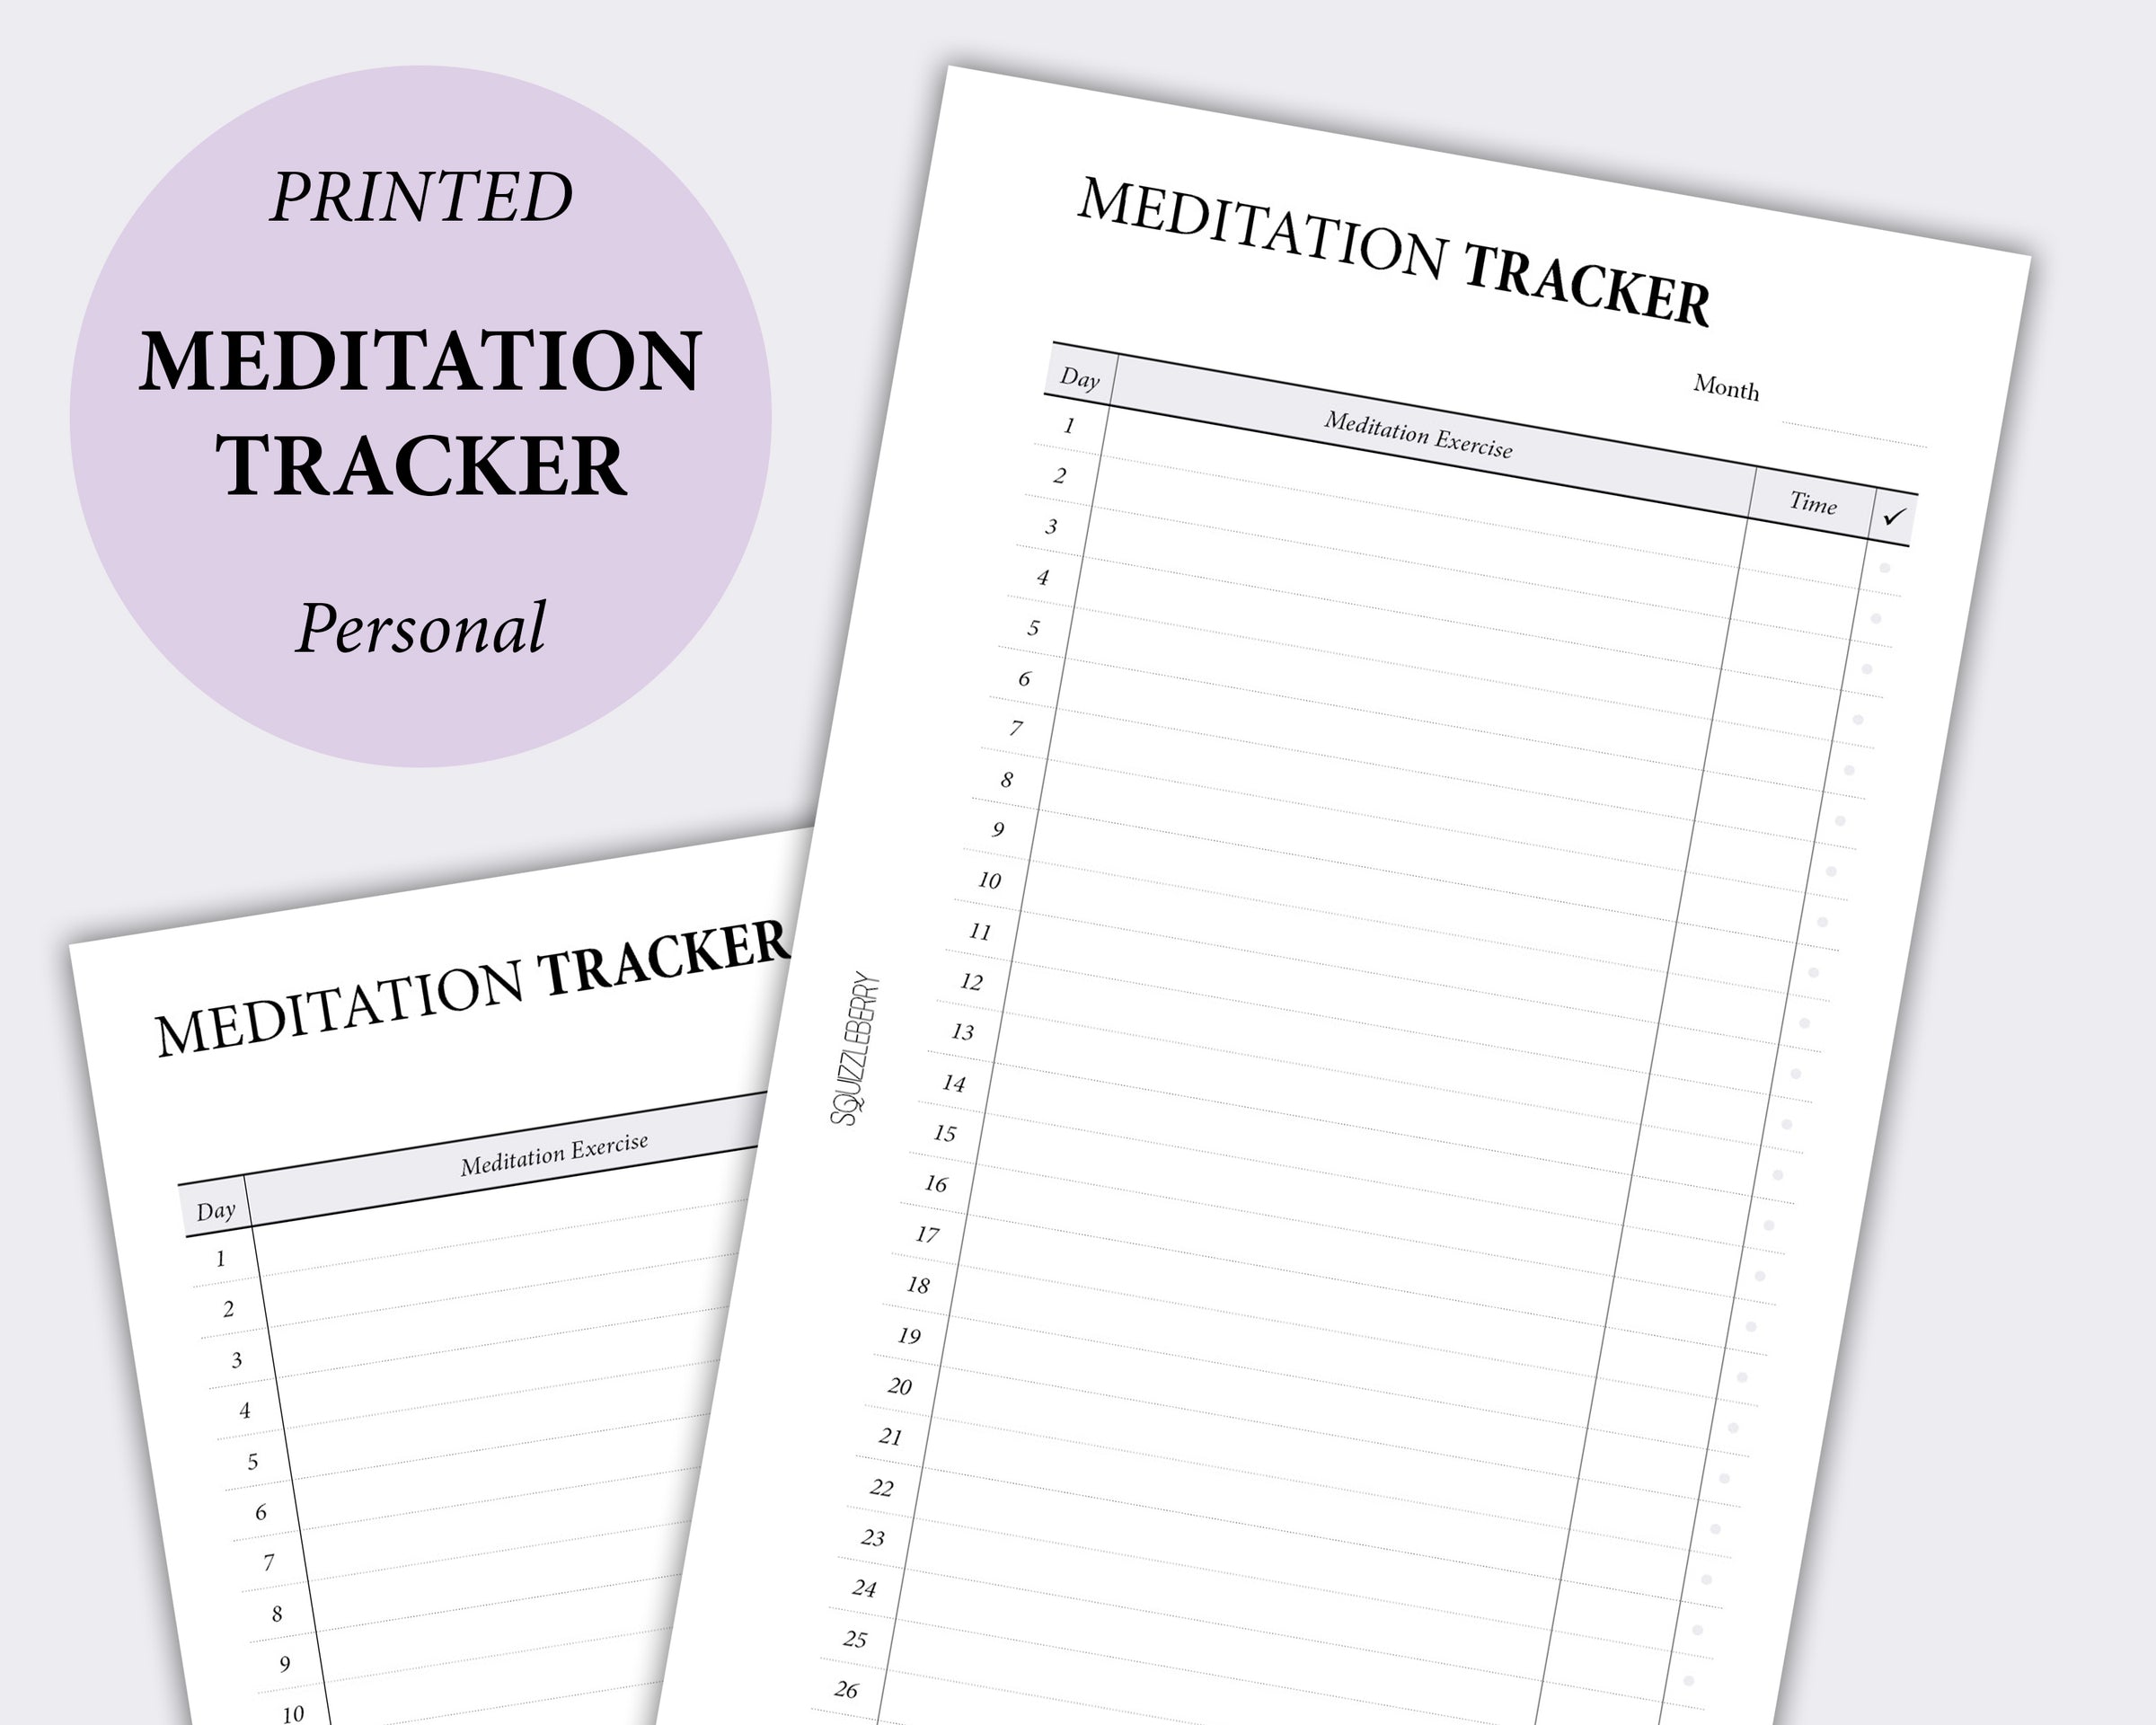 Meditation Tracker - Personal | SquizzleBerry